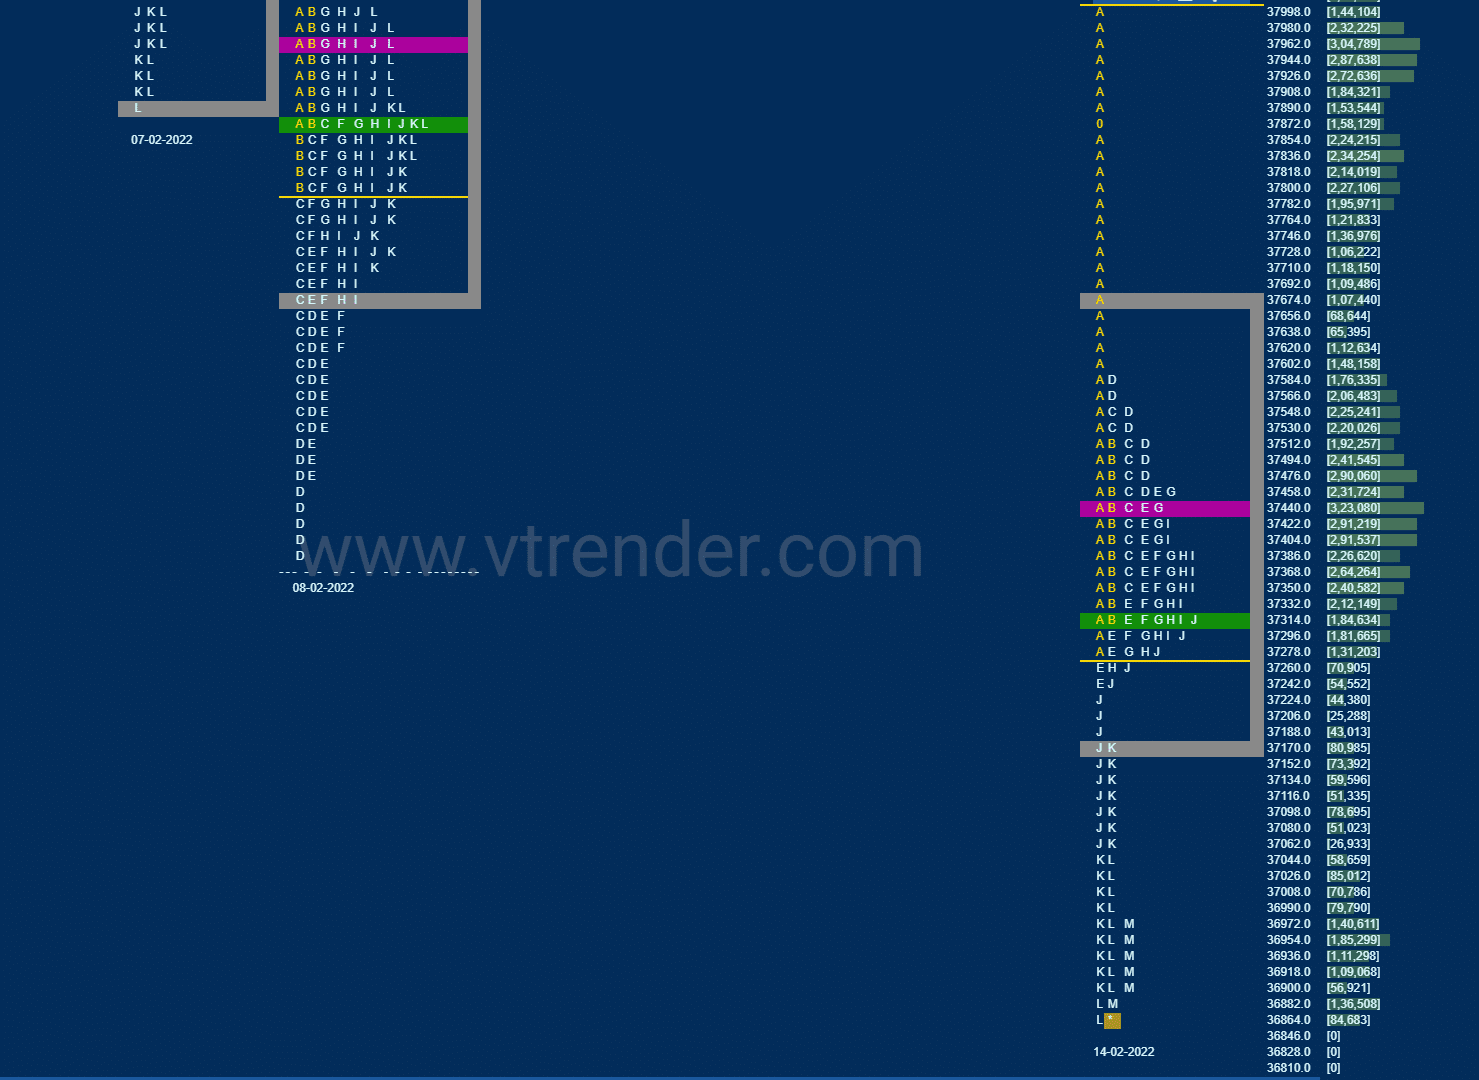 Bnf 9 Market Profile Analysis Dated 14Th February 2022 Banknifty Futures, Charts, Day Trading, Intraday Trading, Intraday Trading Strategies, Market Profile, Market Profile Trading Strategies, Nifty Futures, Order Flow Analysis, Support And Resistance, Technical Analysis, Trading Strategies, Volume Profile Trading